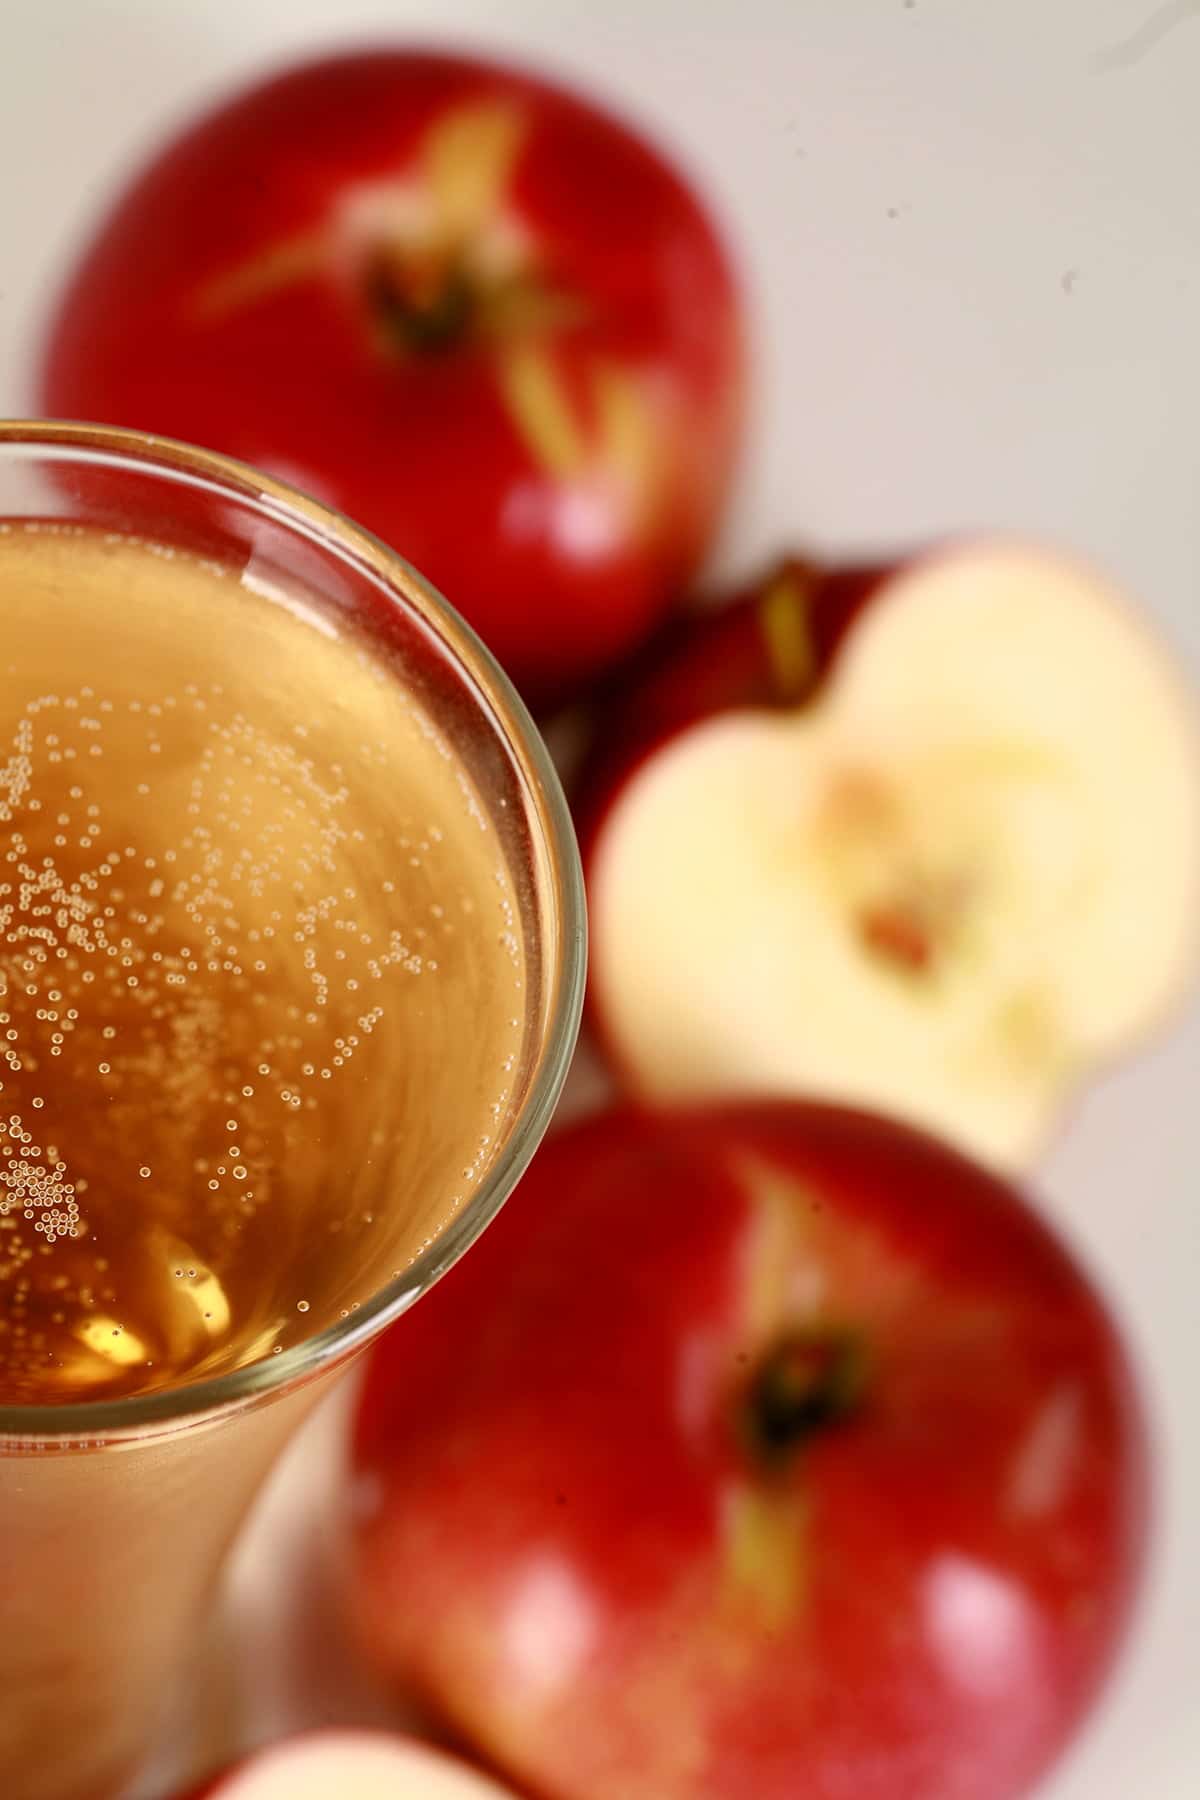 Close of view of a glass of homemade hard apple cider, surrounded by red apples.